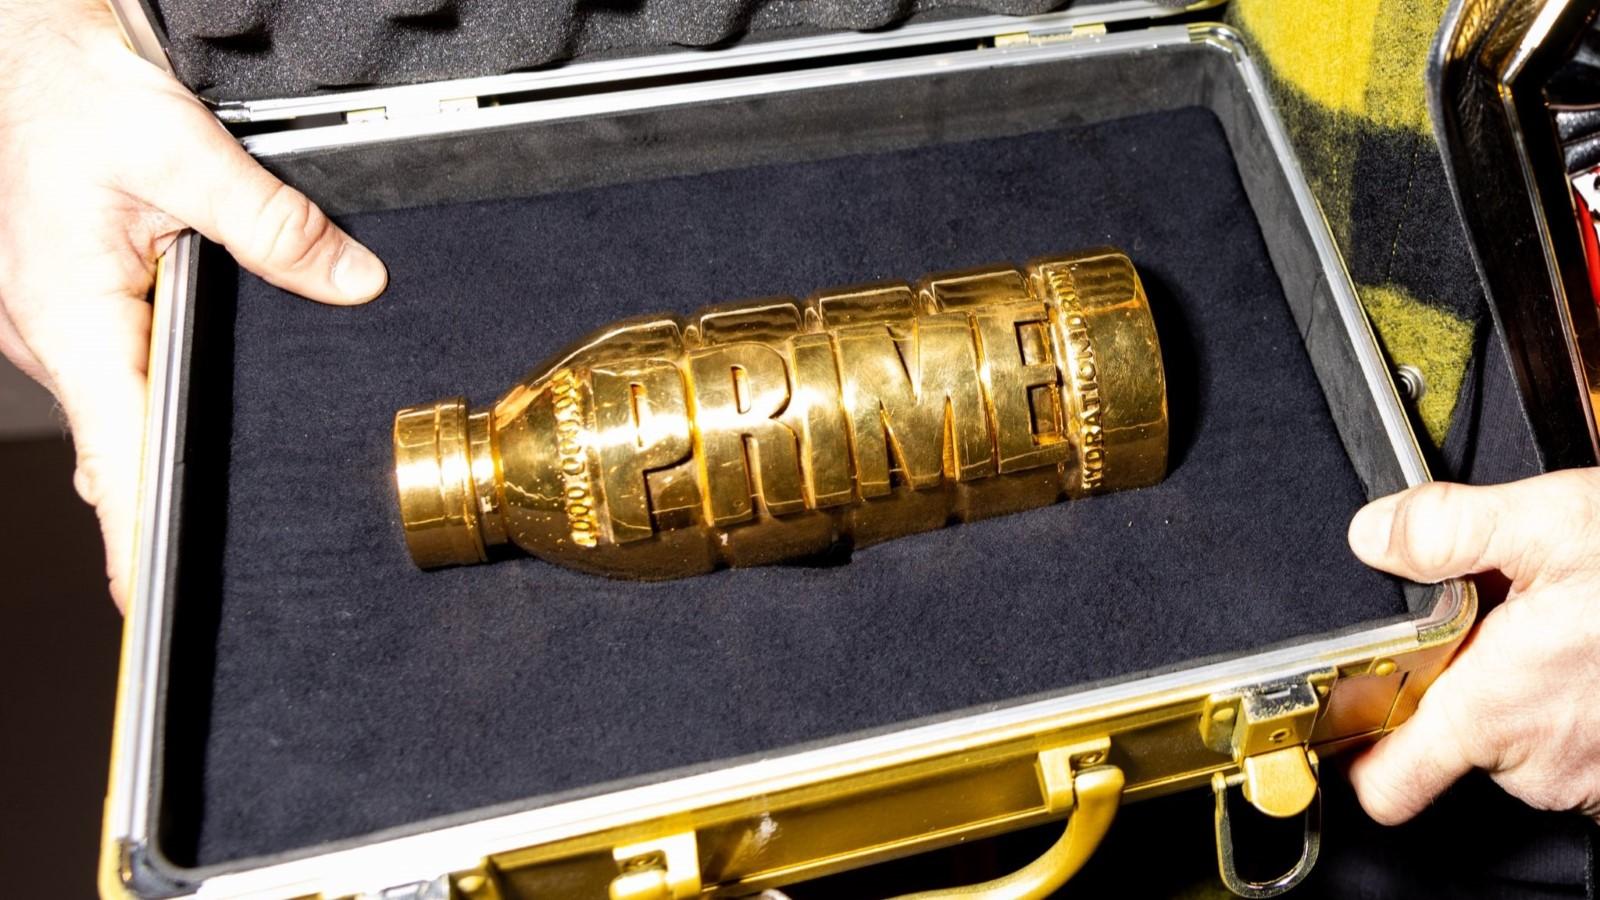 KSI & Logan Paul announce chance to win solid GOLD Prime bottle worth  £400k… but you have to crack into bulletproof case